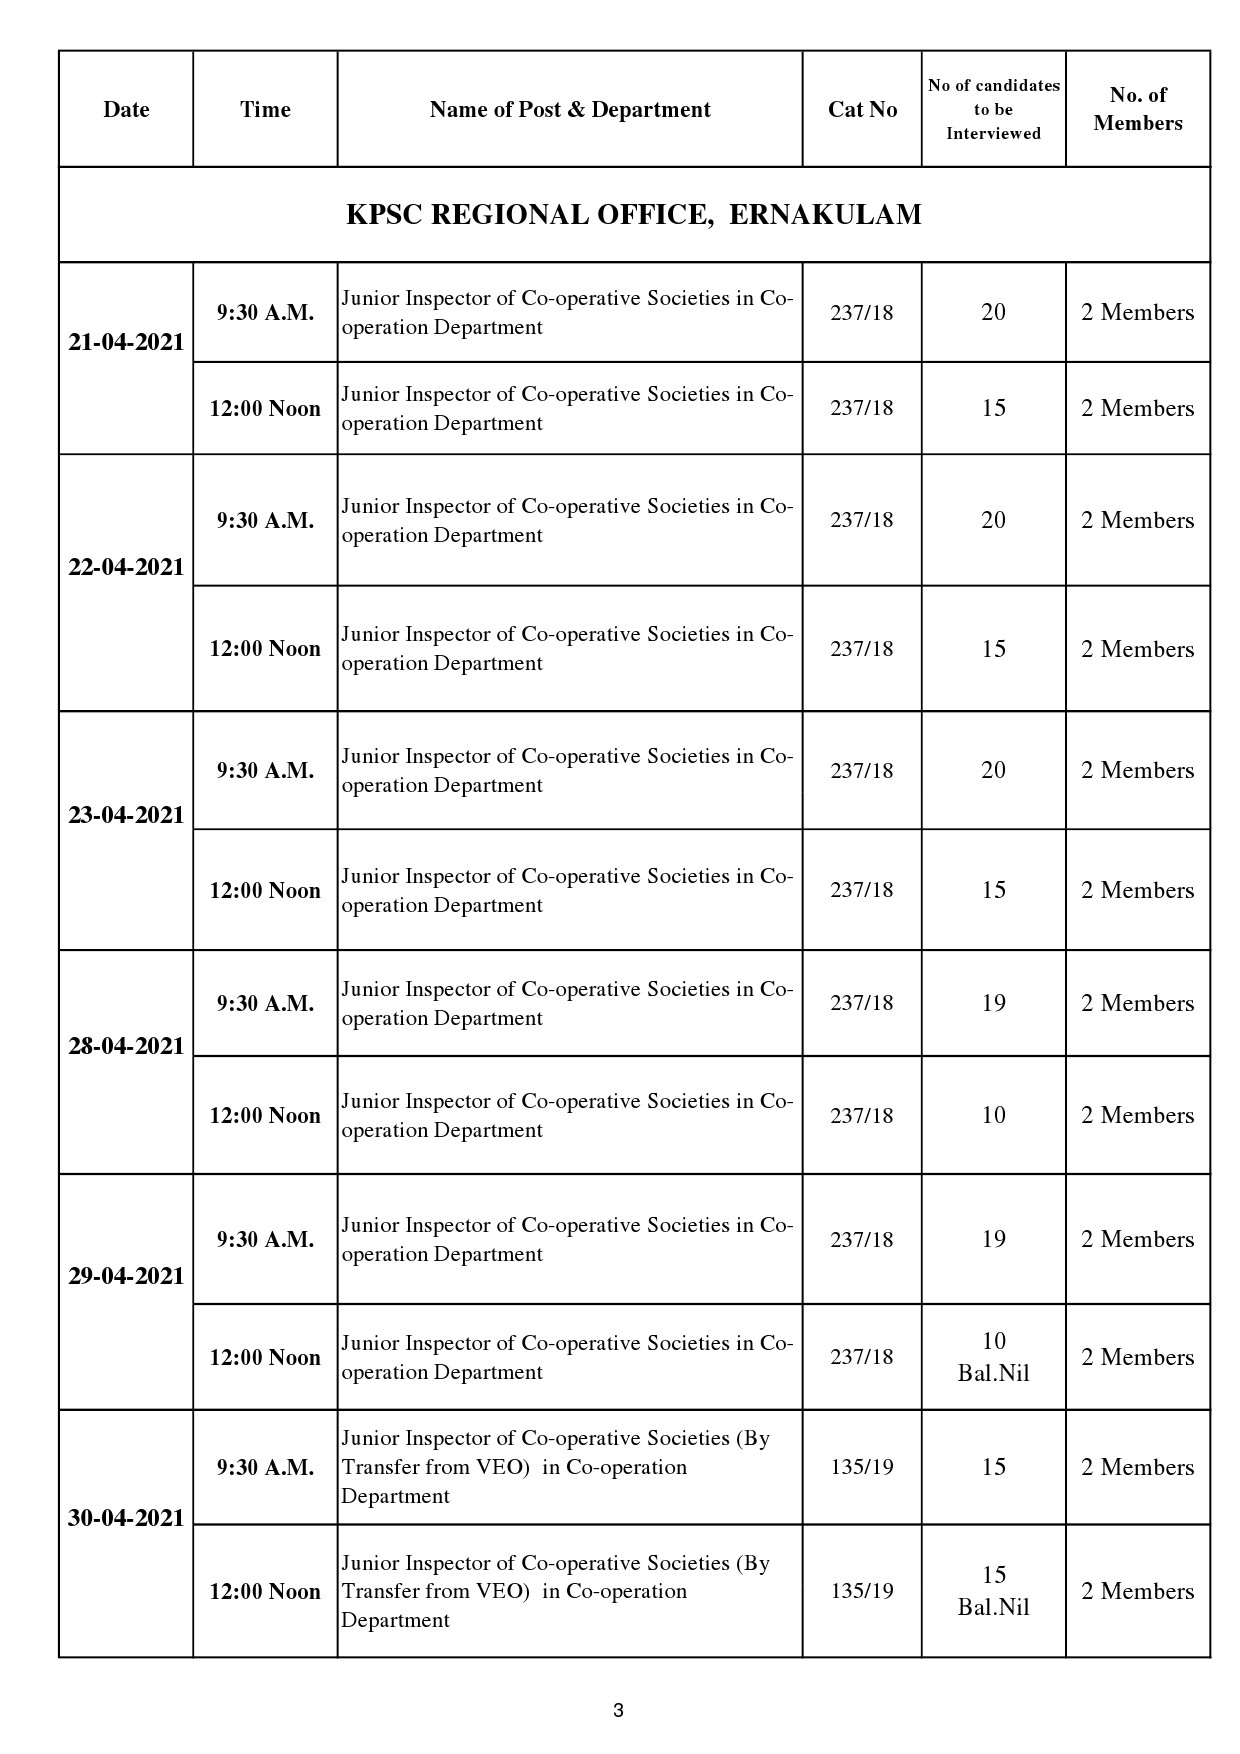 REVISED INTERVIEW PROGRAMME FOR THE MONTH OF APRIL 2021 - Notification Image 3